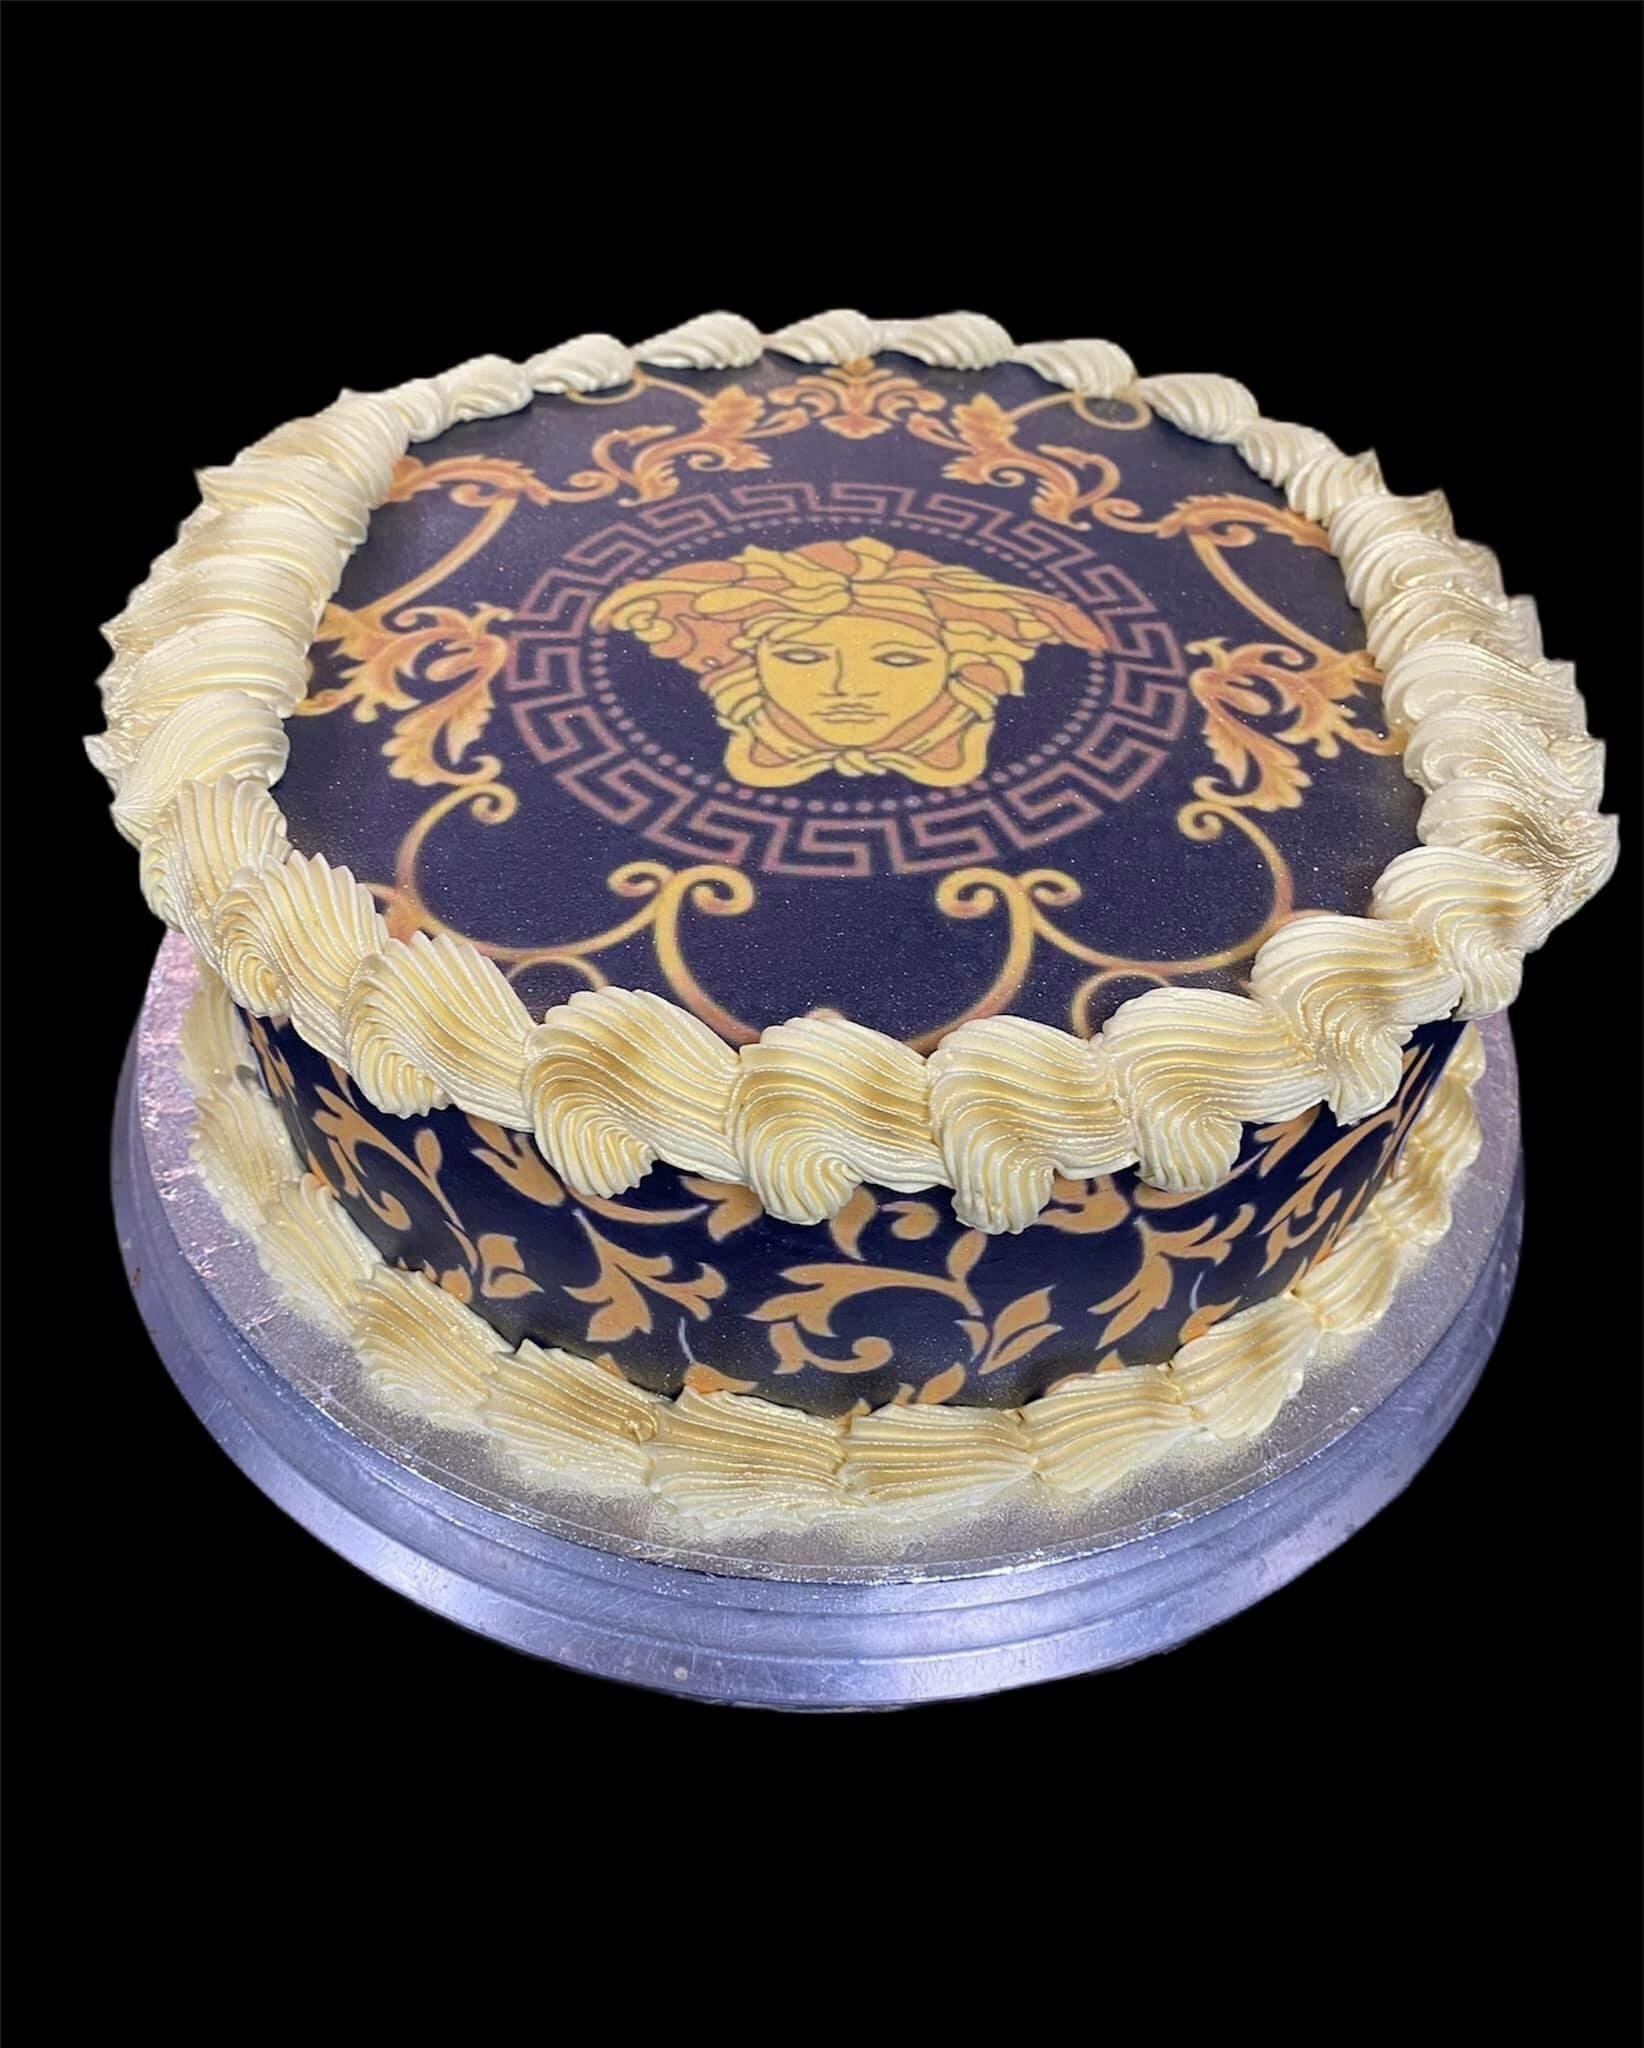 Versace cake for birthday in Ojo - Meals & Drinks, Mercy Emmanuel-Eze |  Find more Meals & Drinks services online from olist.ng